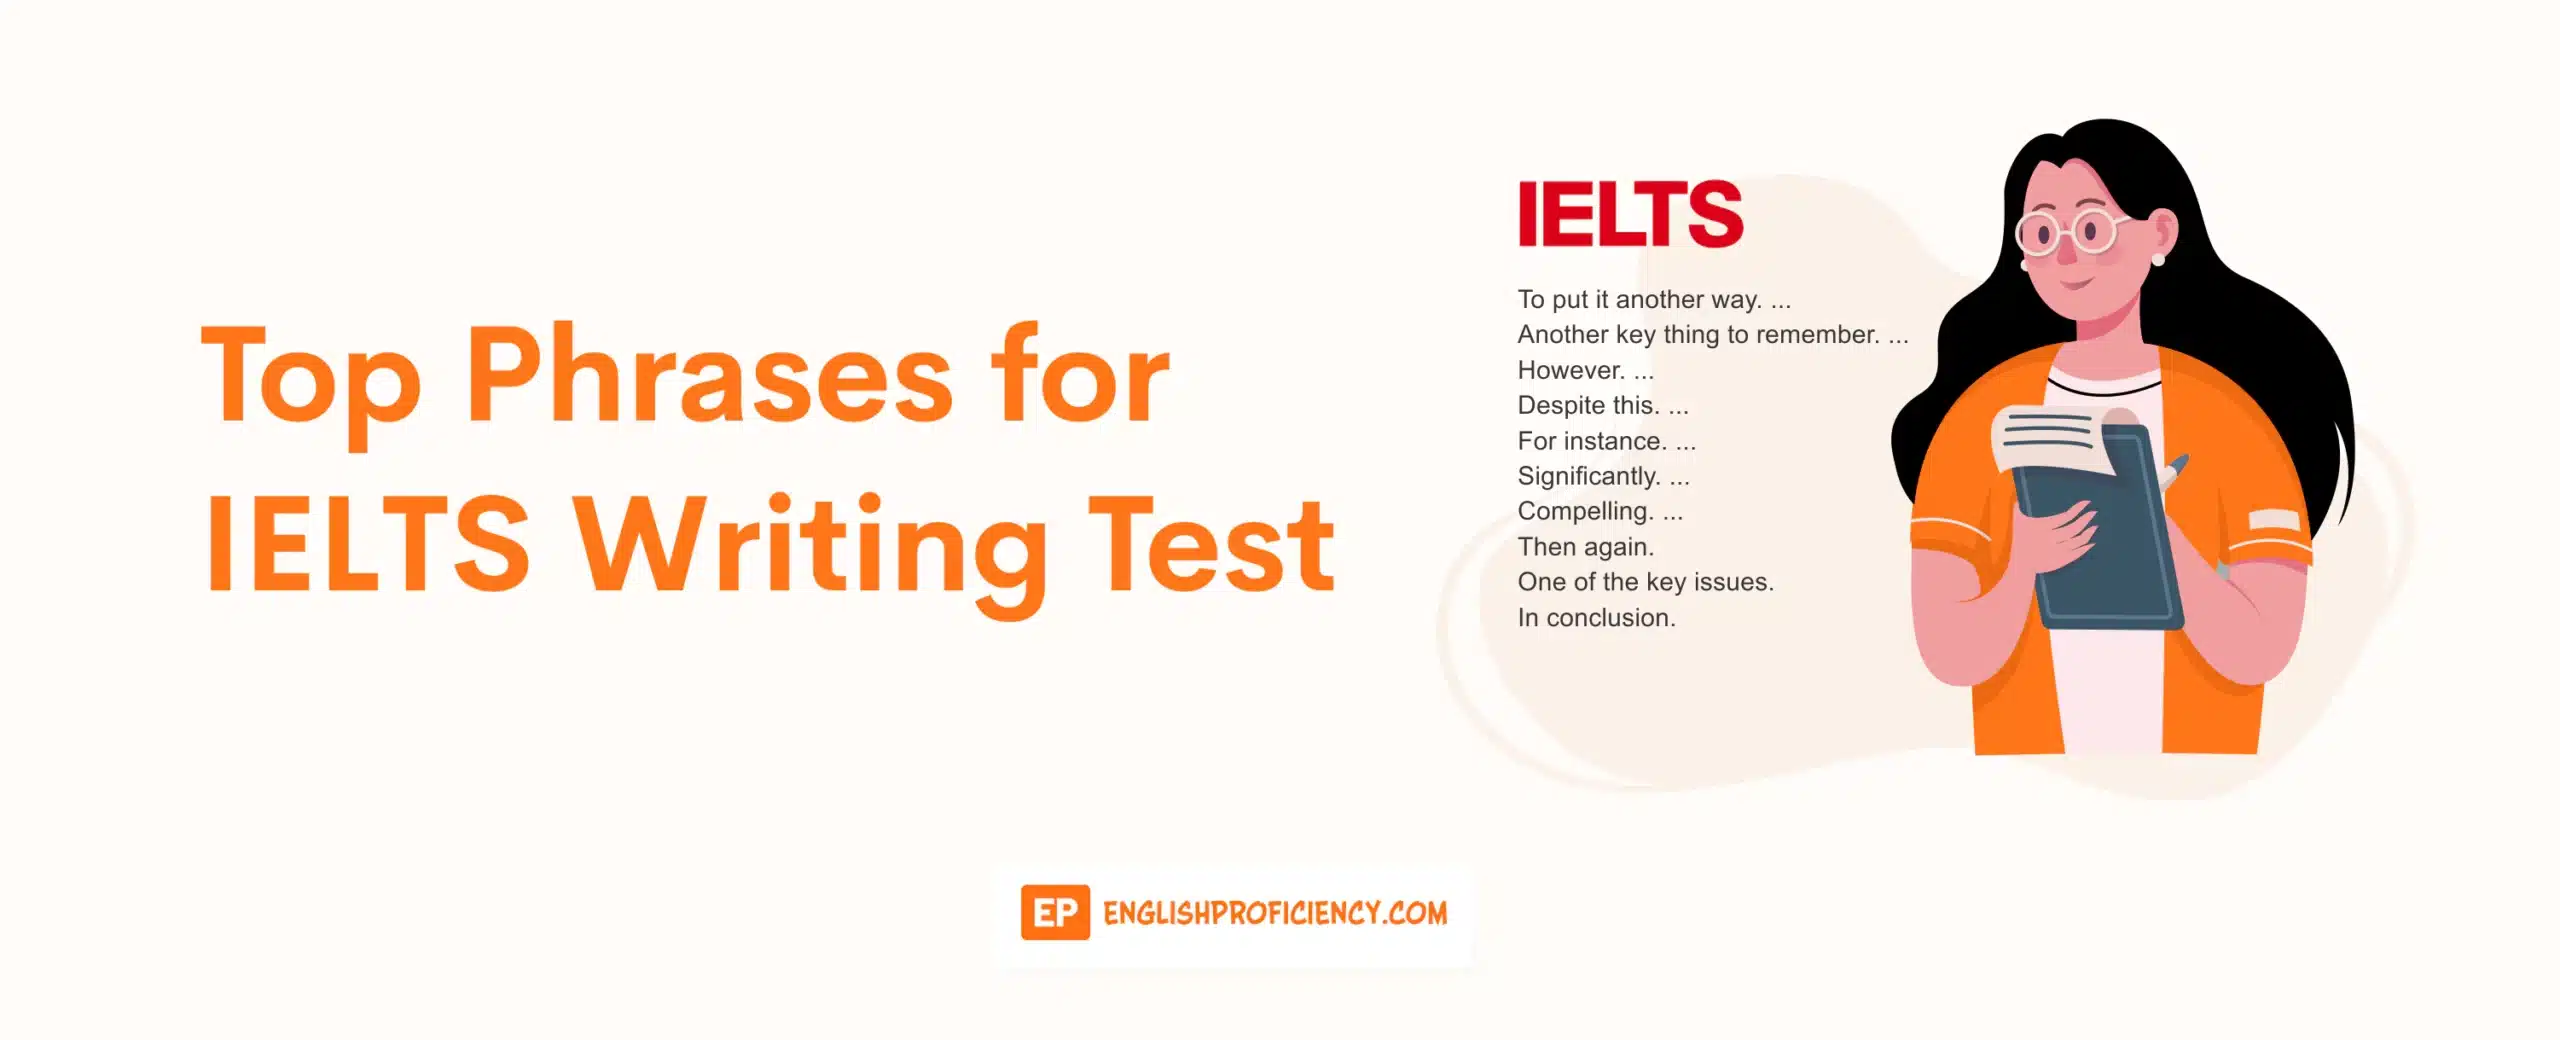 Top 100 Phrases for IELTS Writing Test